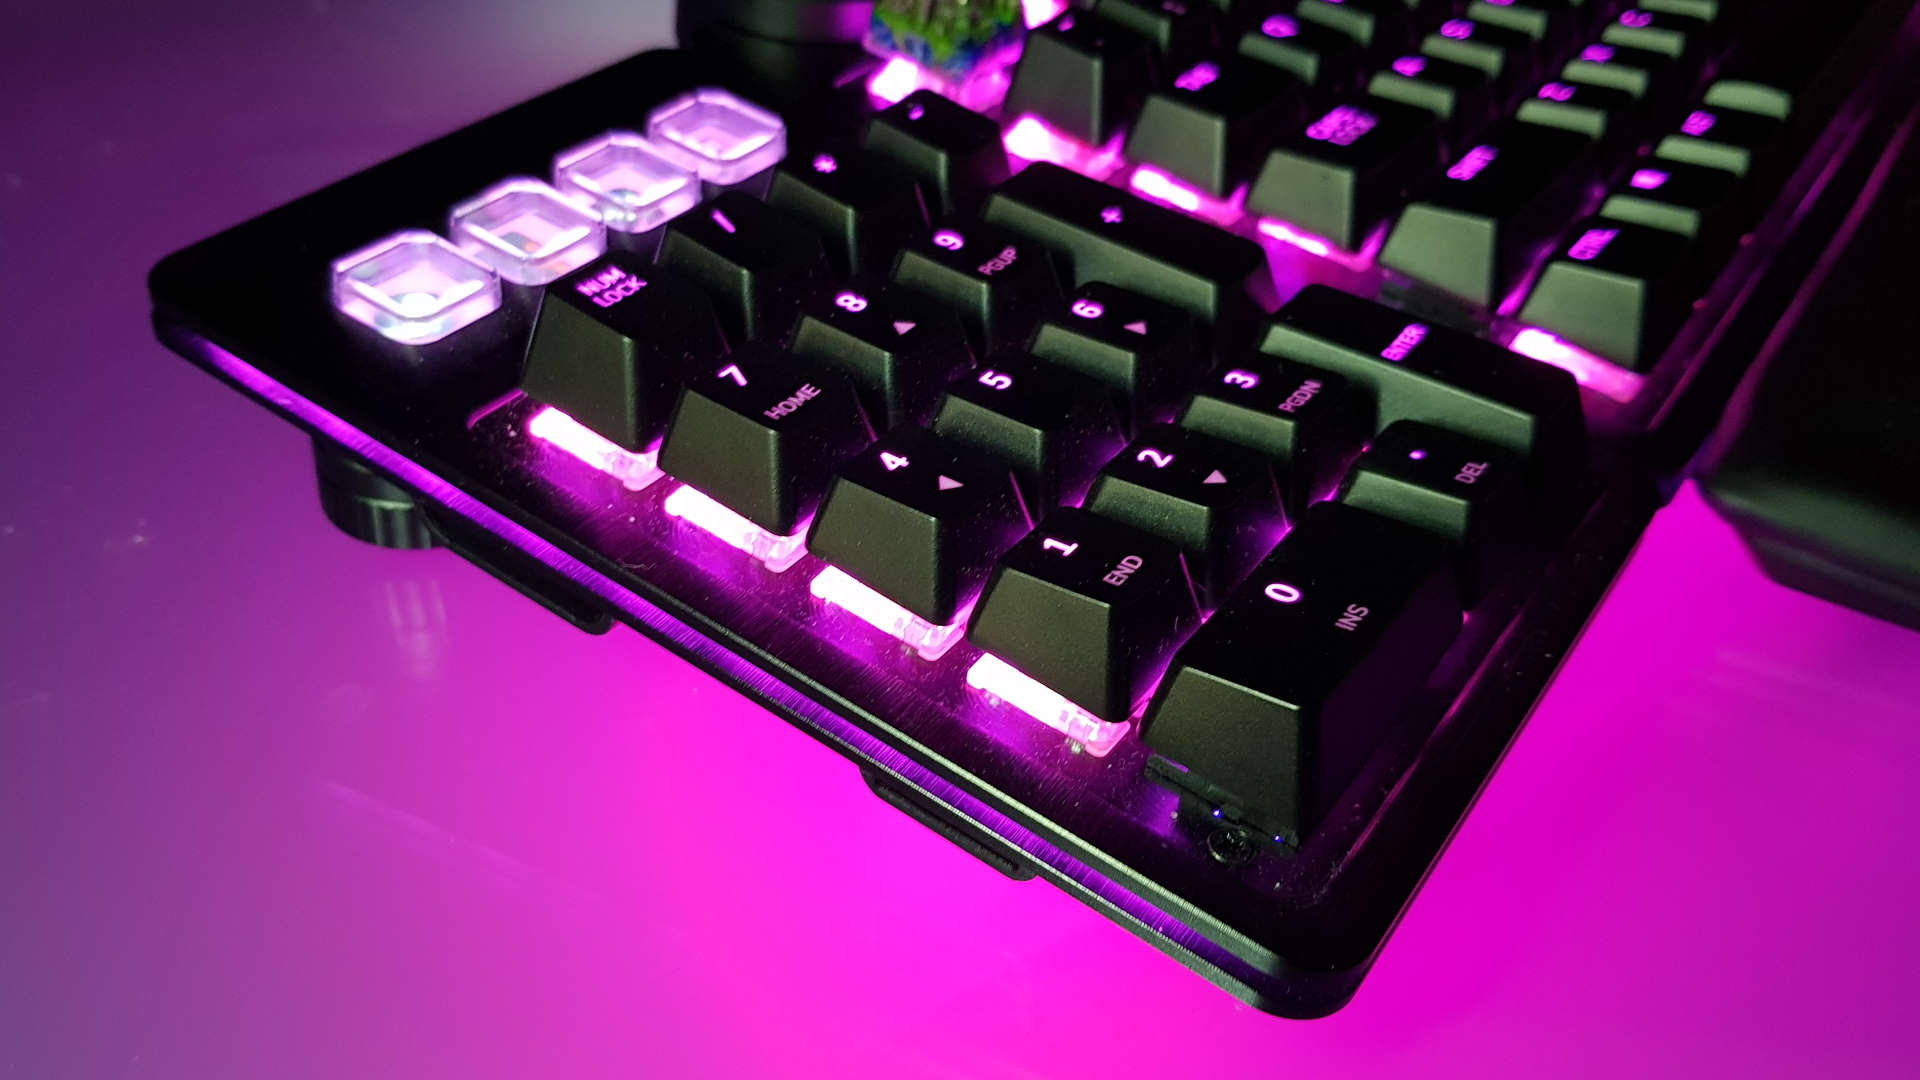 Close up image of the Mountain Everest Max's detachable numpad on purple background.